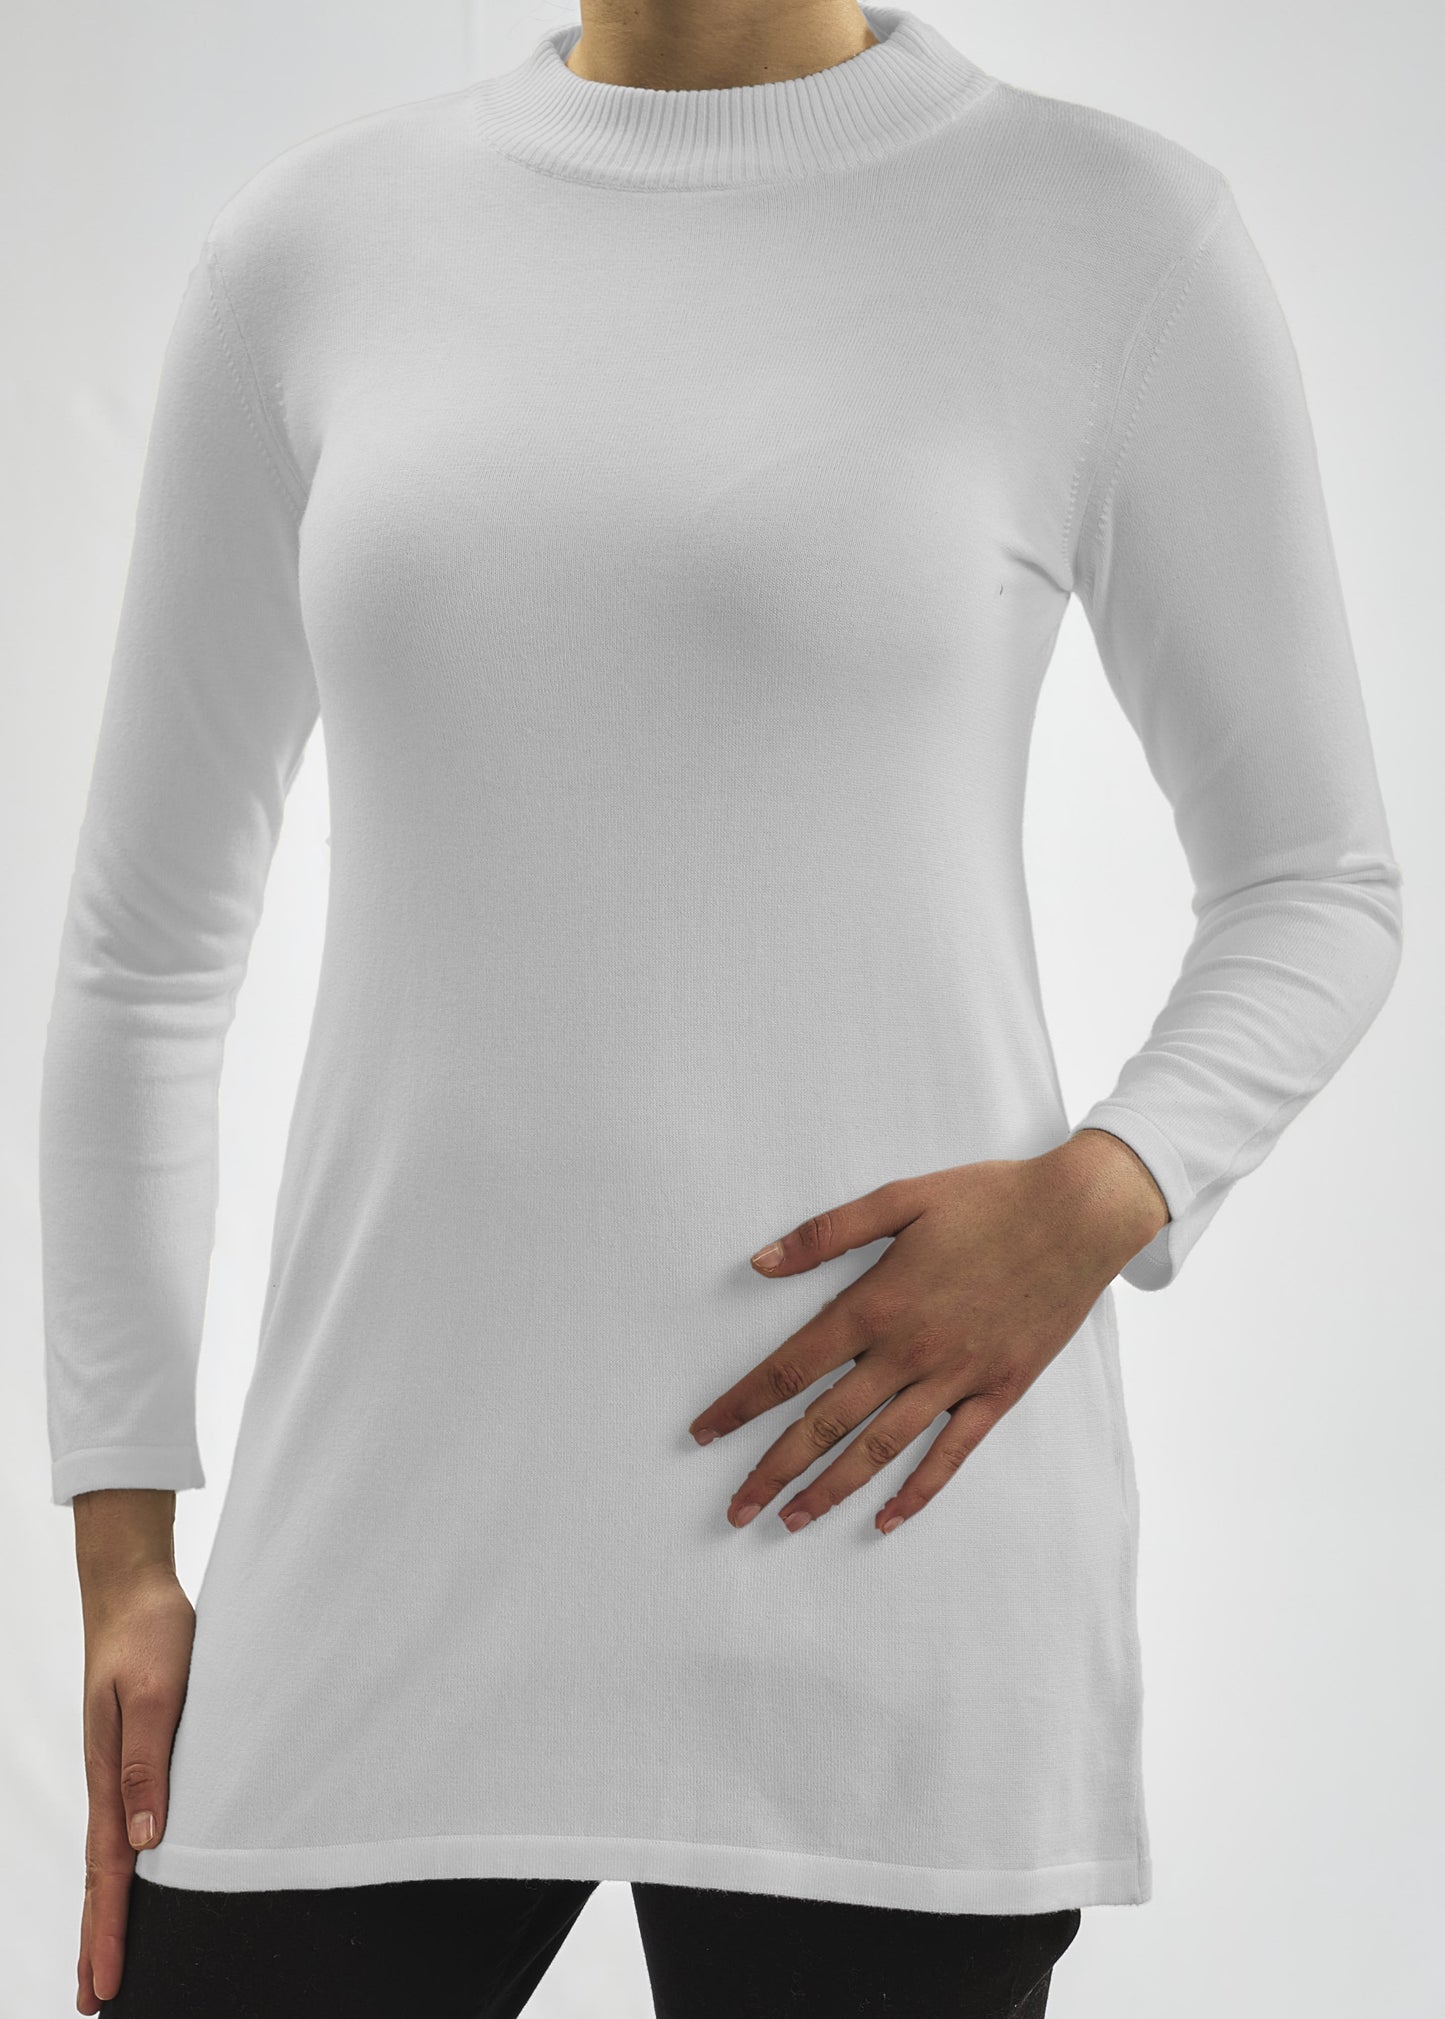 Long Cotton Knitwear Round Neck Basic Blouse With Several Colors